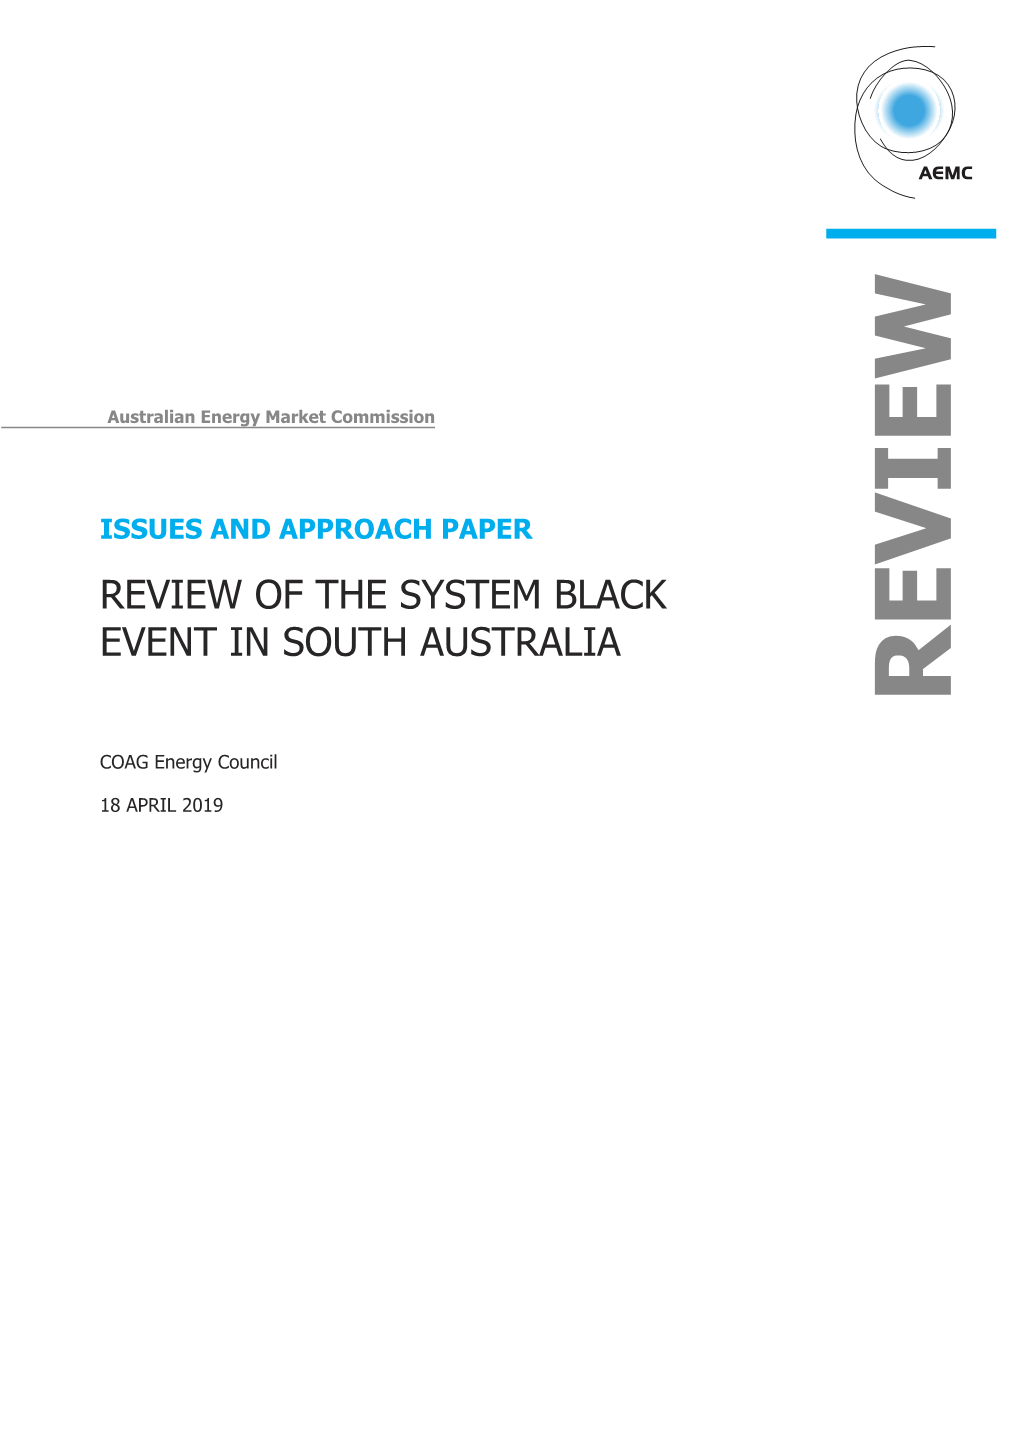 Review of the System Black Event in South Australia